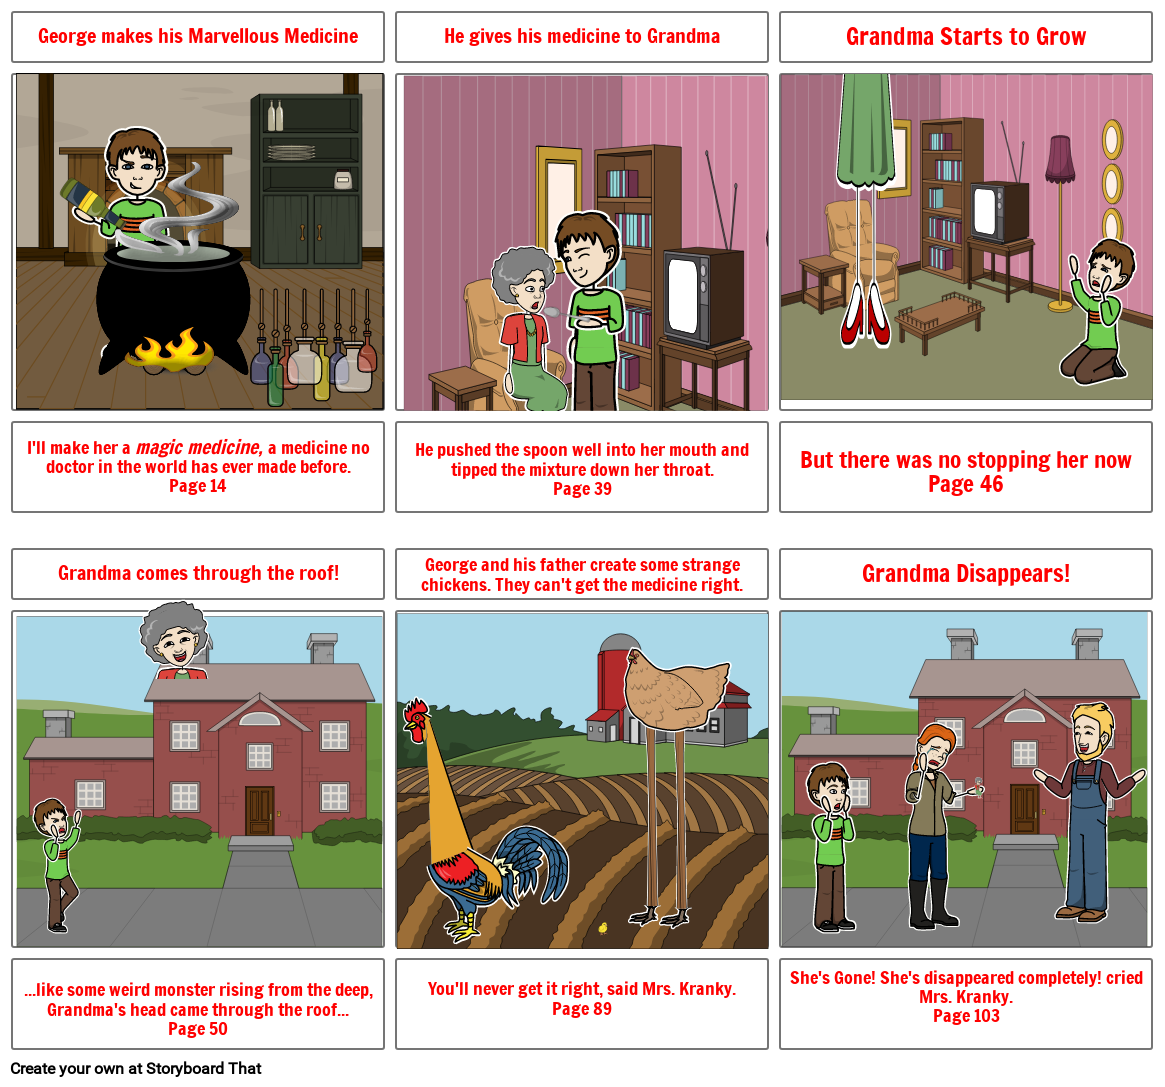 George's Marvellous Storyboard Storyboard by e073e084